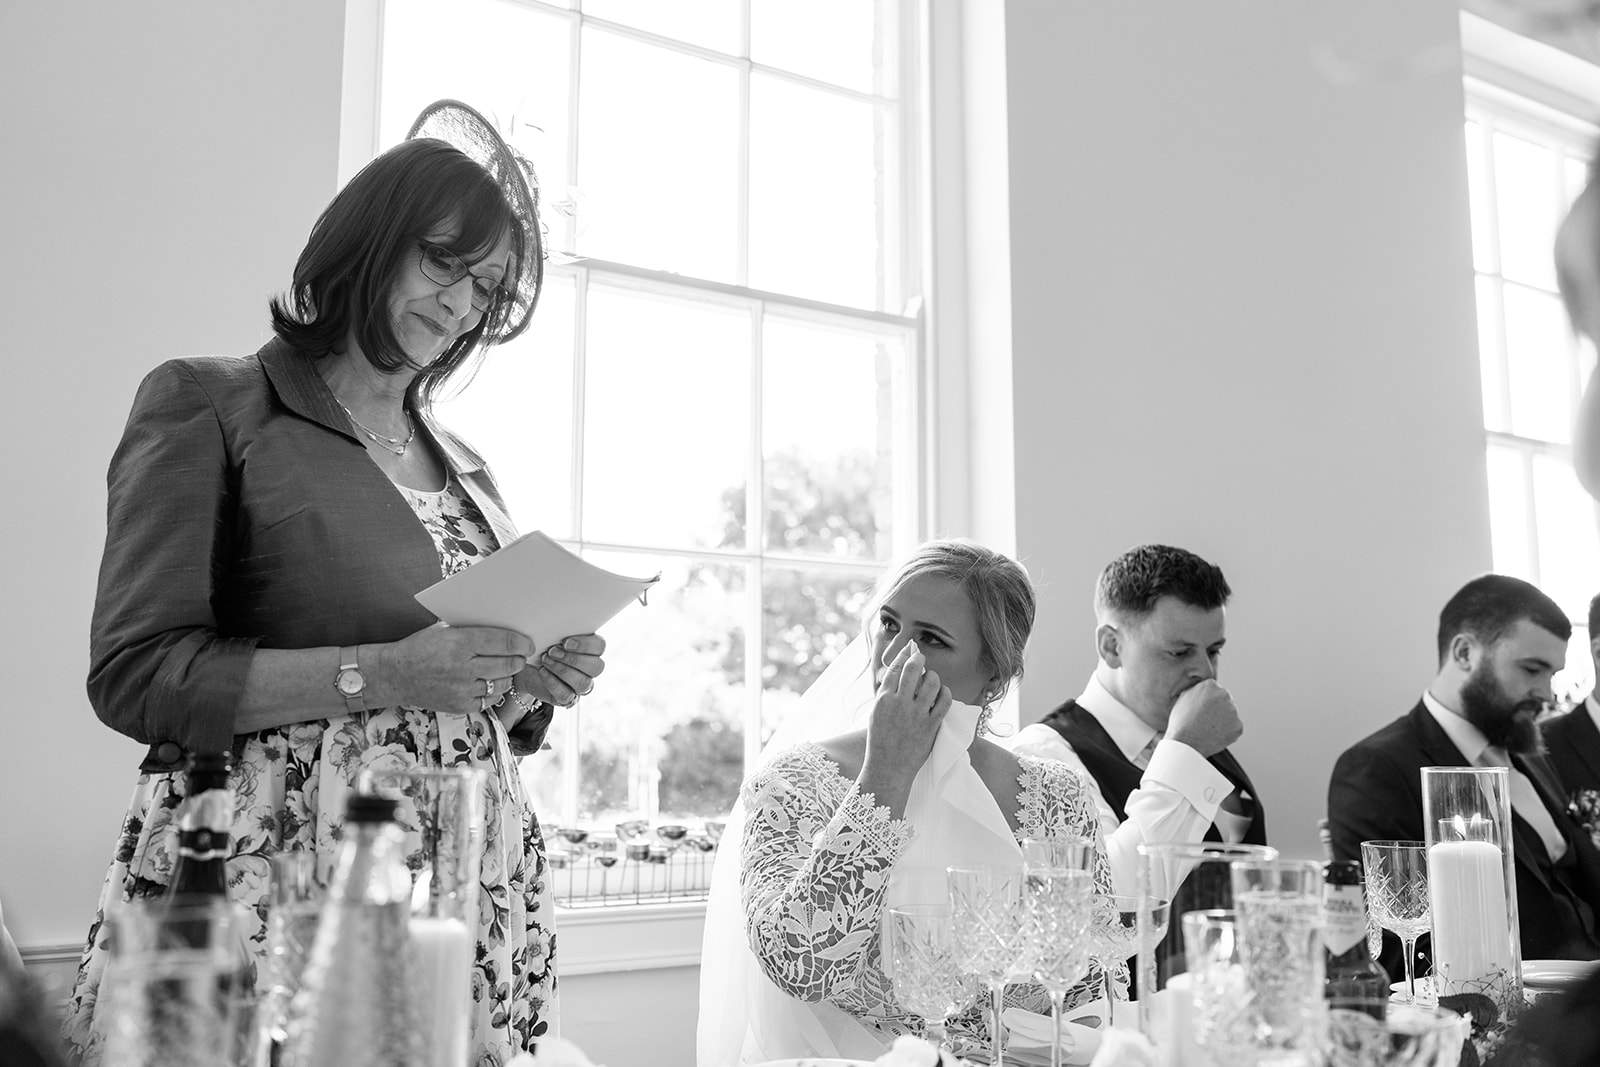 The bride getting emotional during her mothers wedding speech
